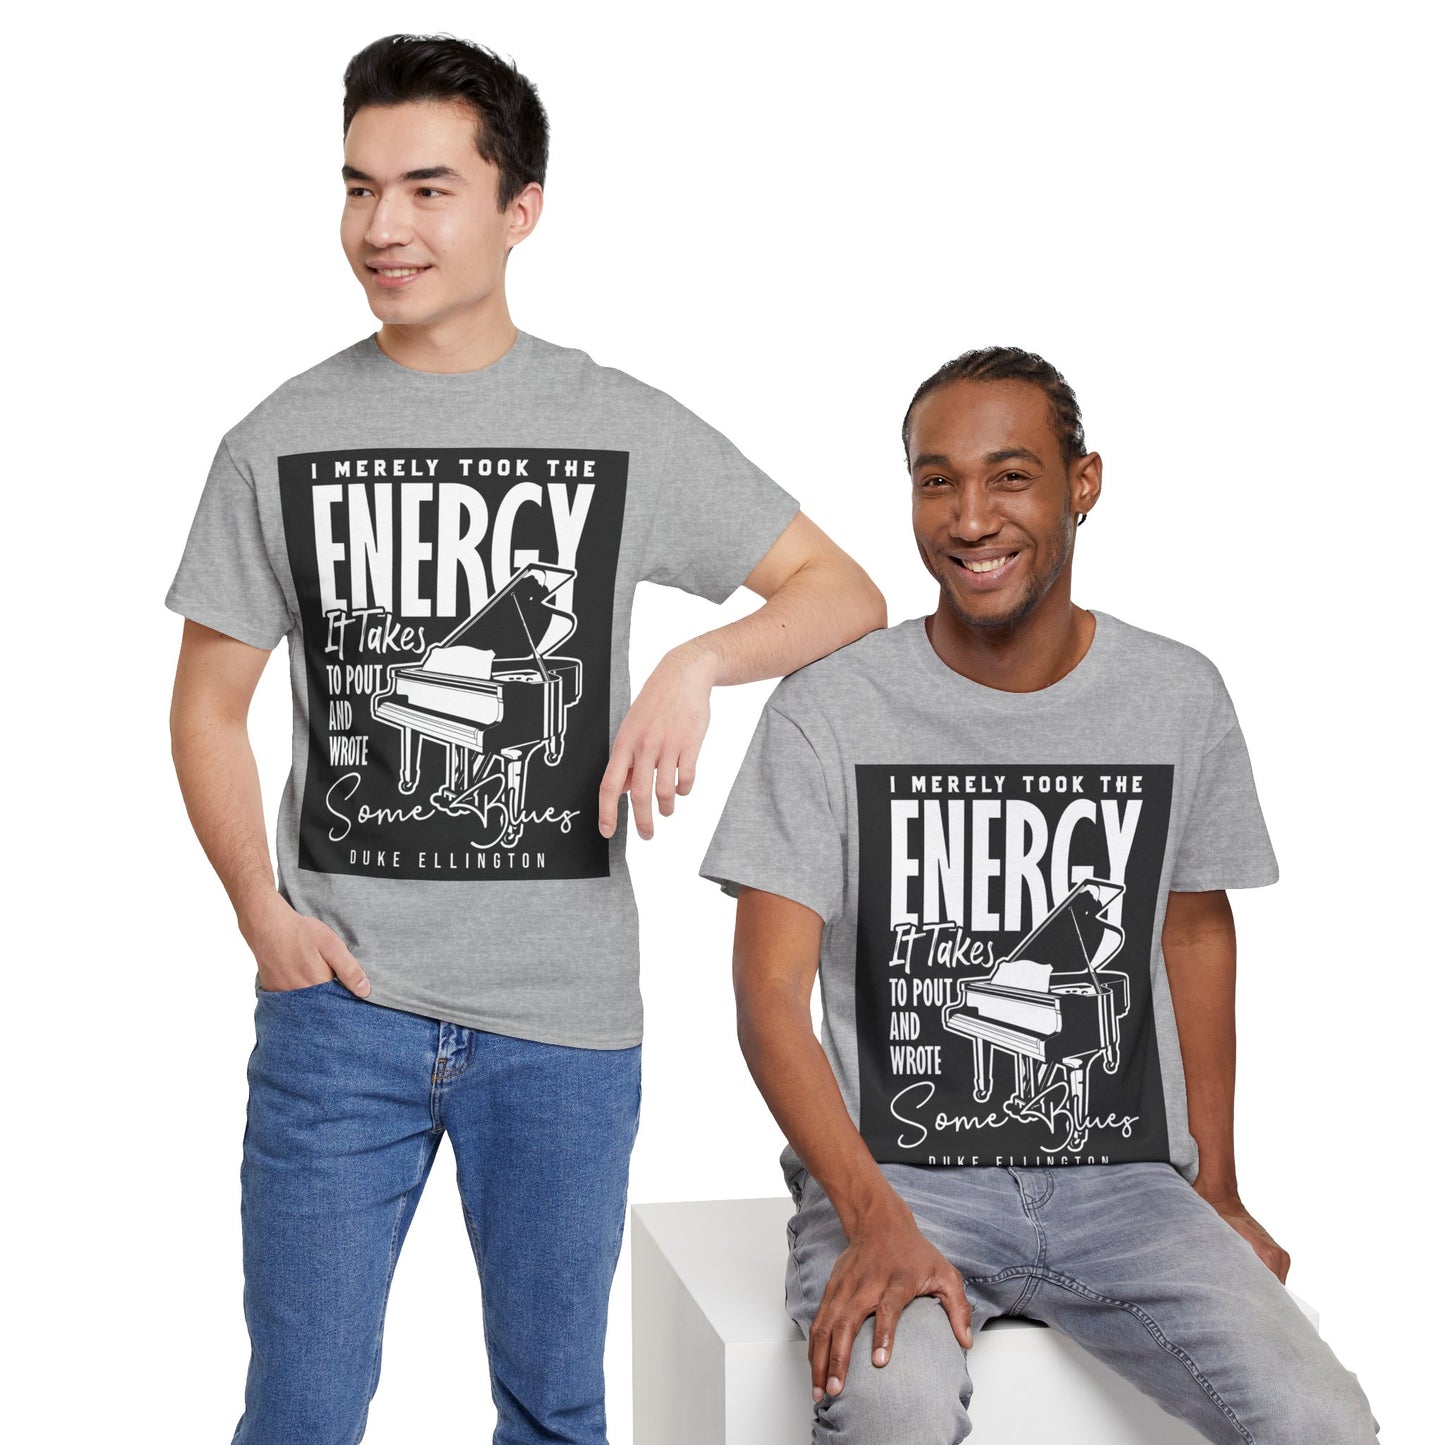 The Order of Music T-Shirt: I merely took the energy